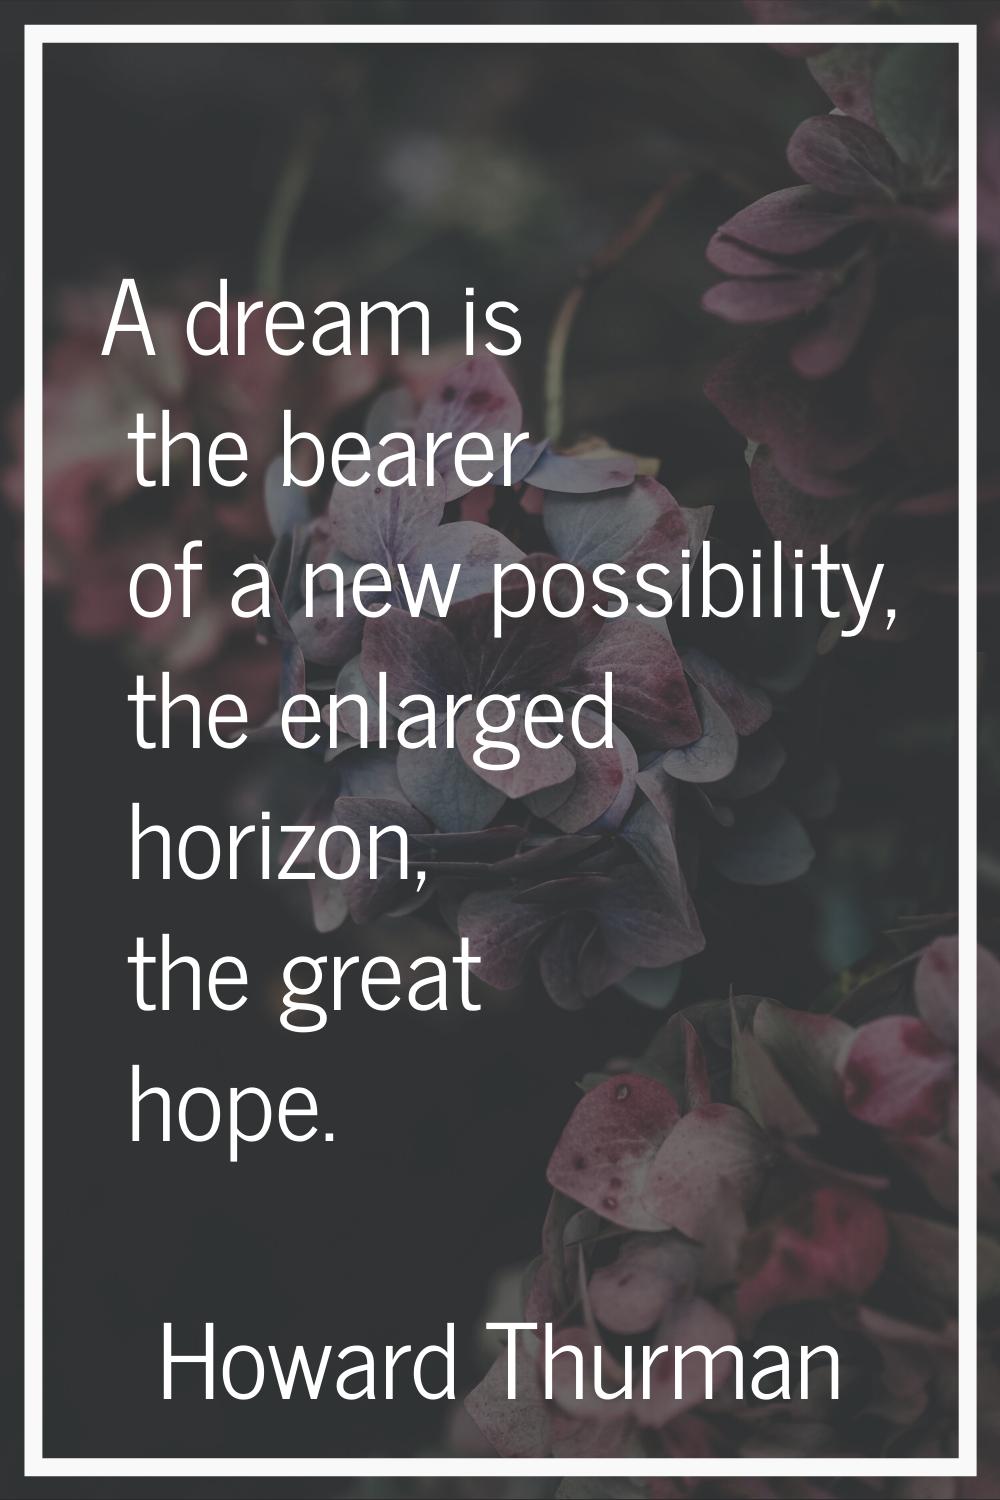 A dream is the bearer of a new possibility, the enlarged horizon, the great hope.